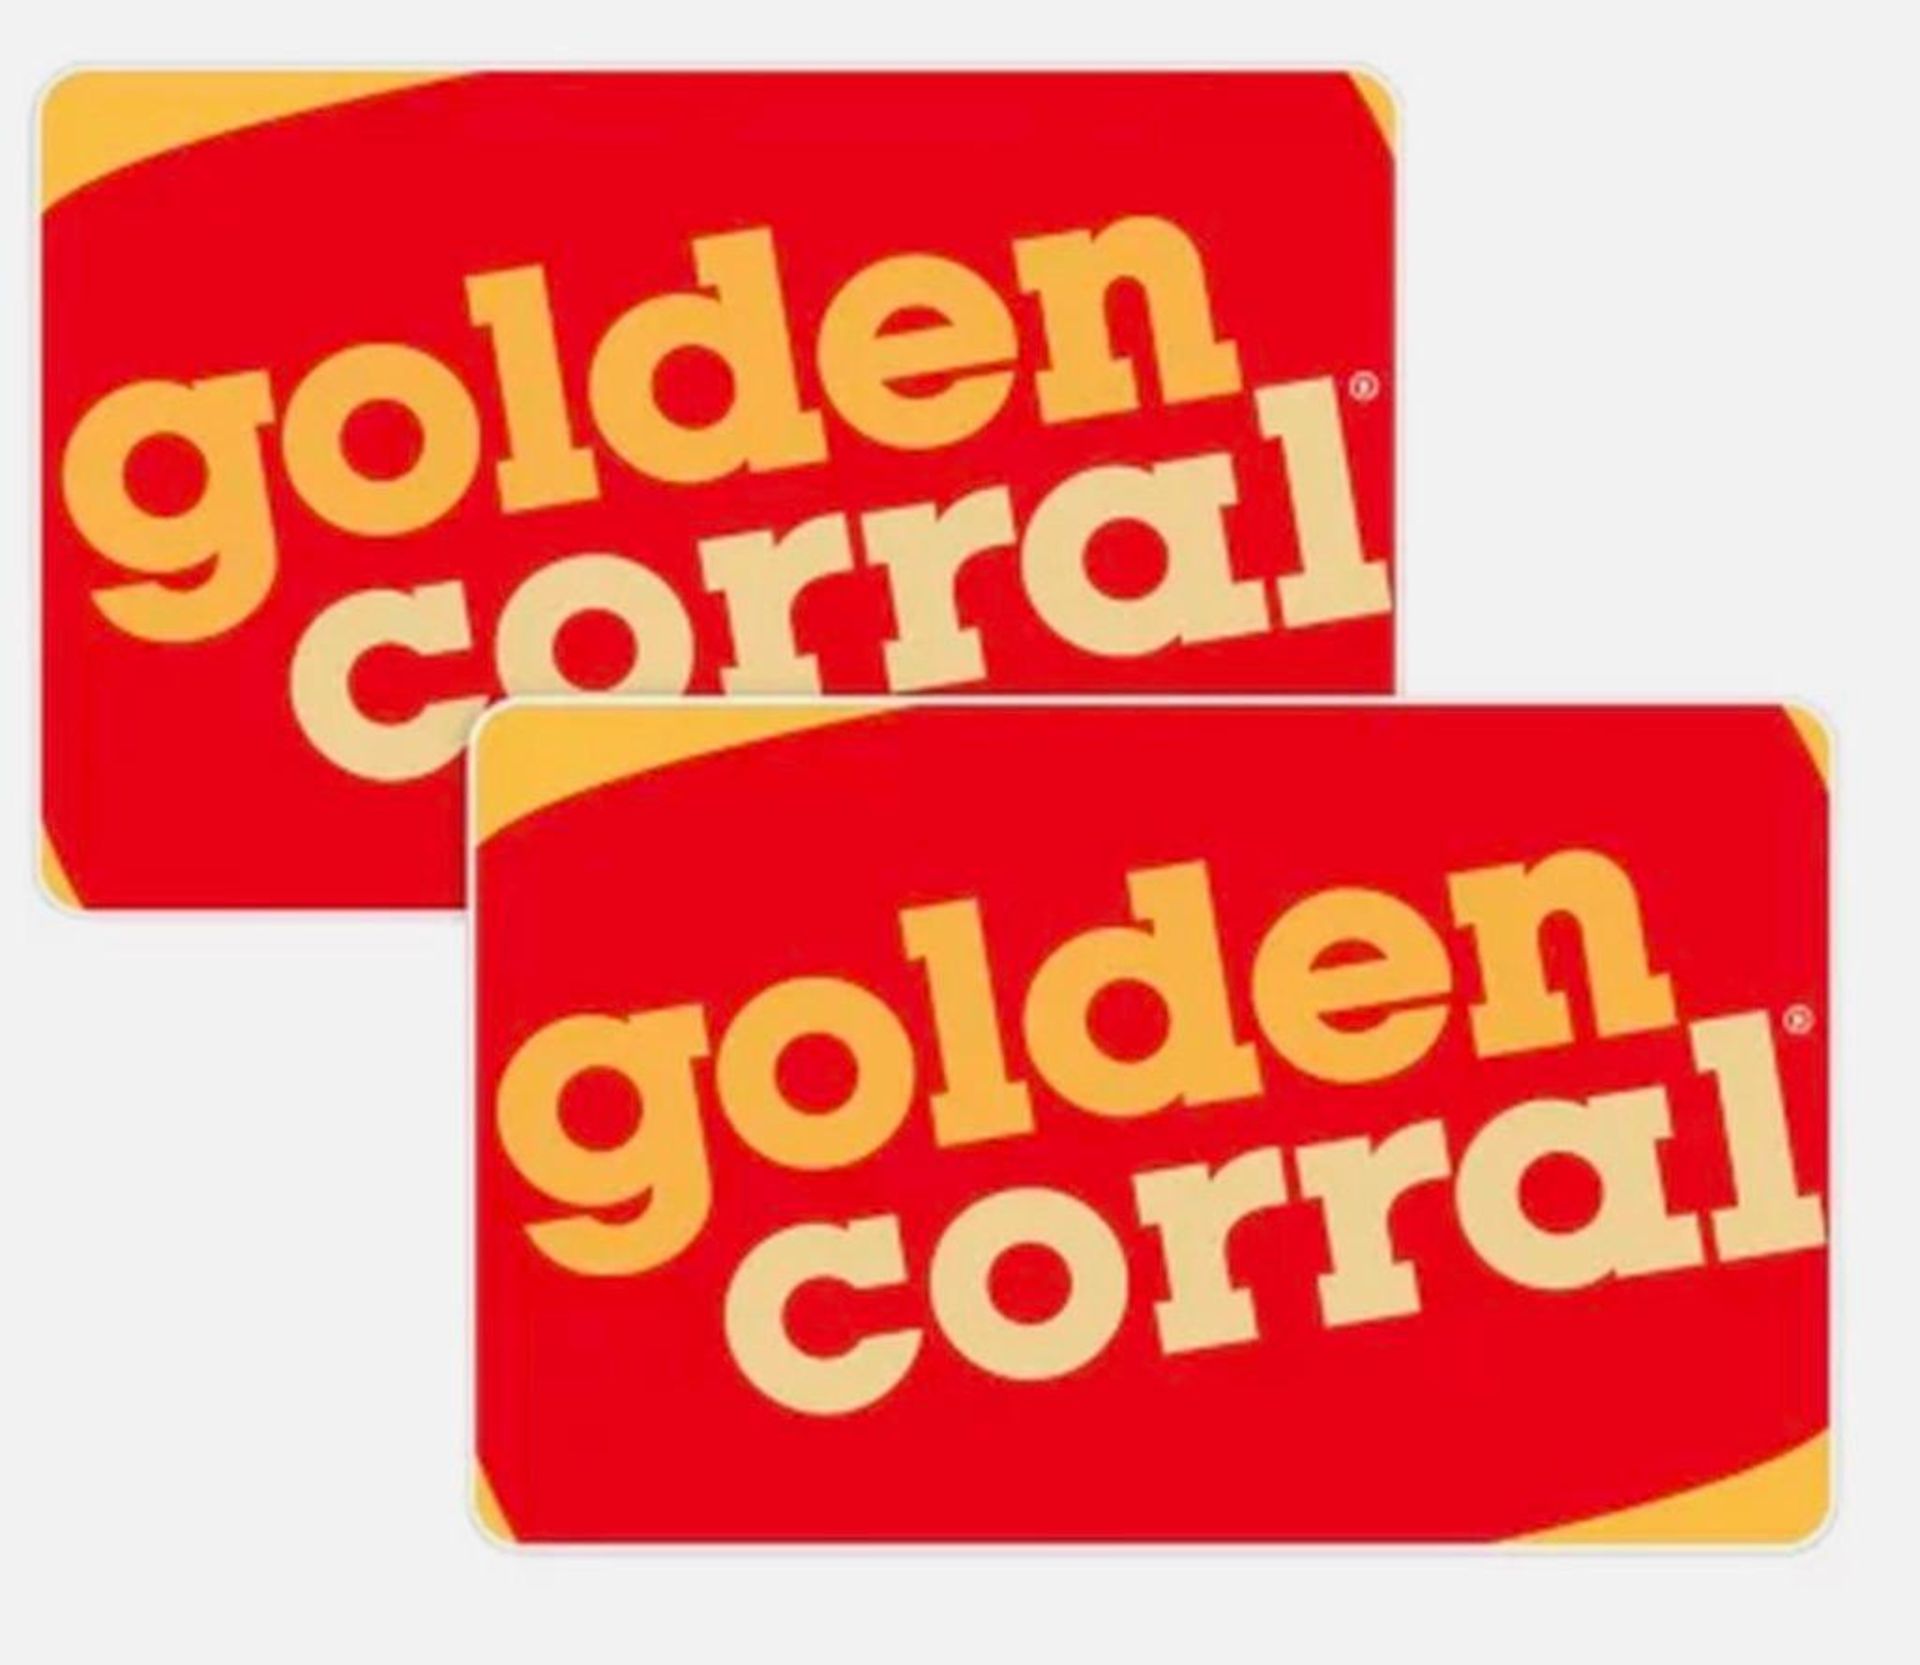 10- $25 Golden Corral Gift Cards ($250 total value) verified